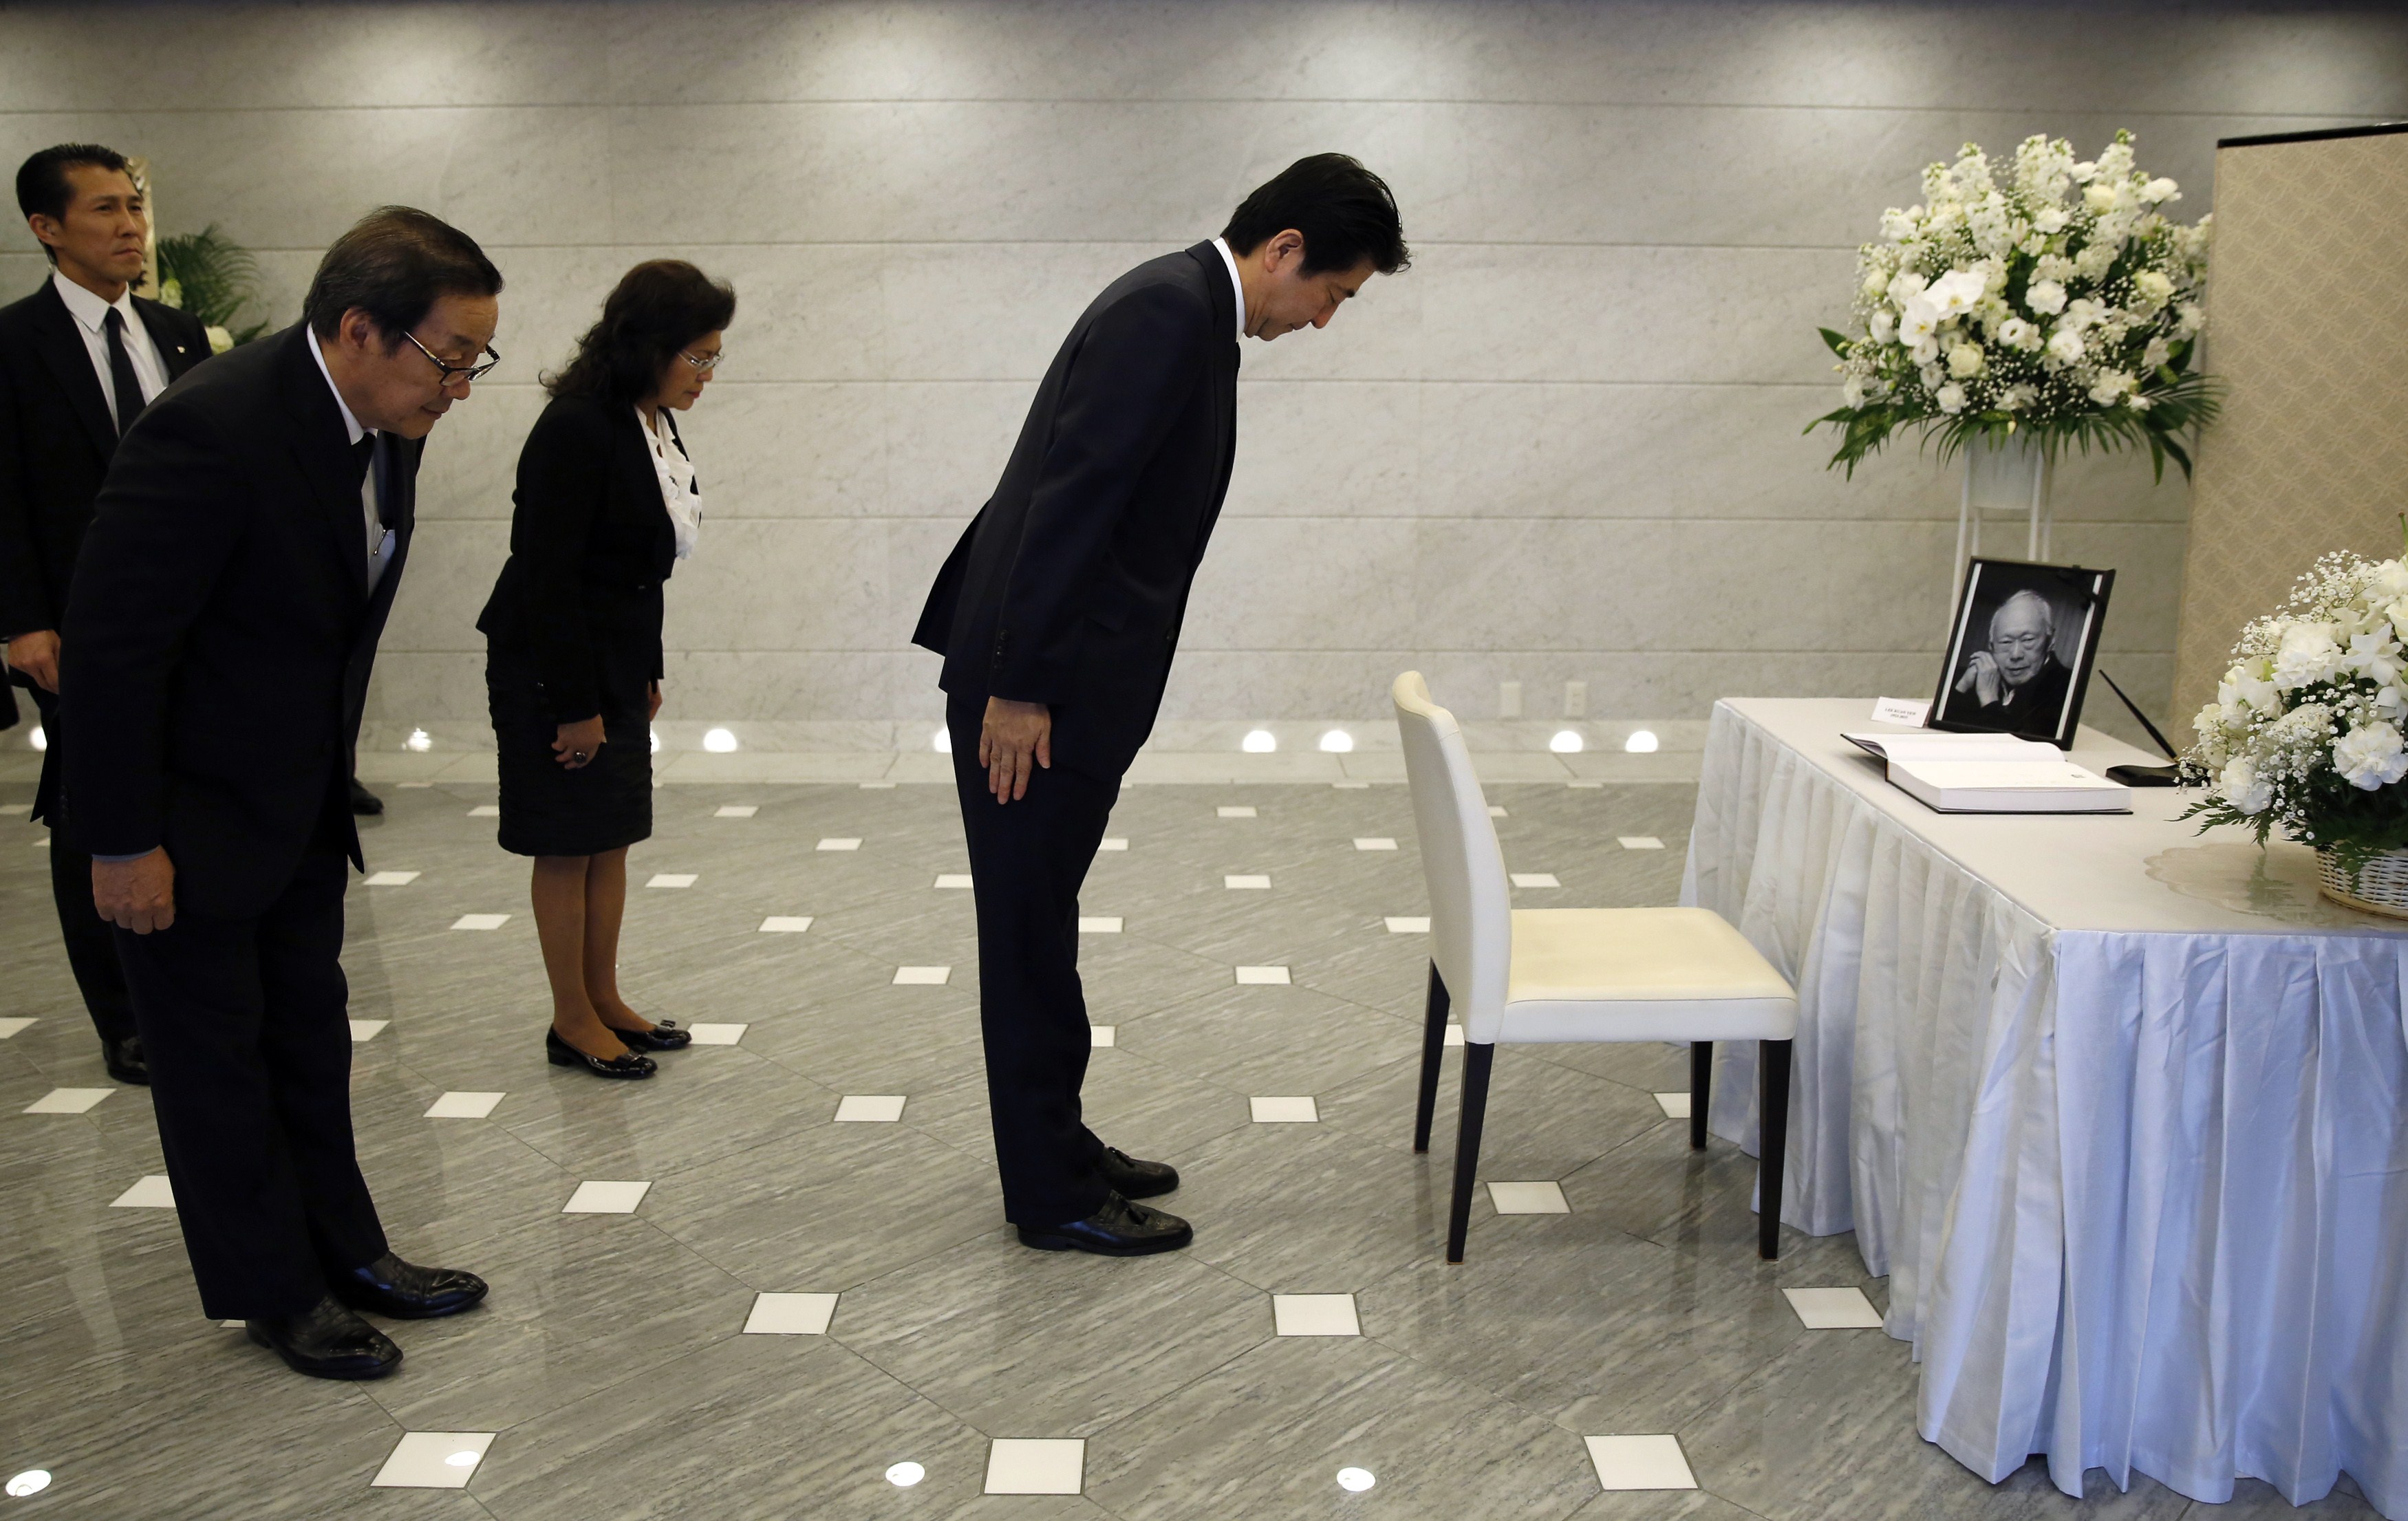 Japan's Prime Minister Shinzo Abe (R) bows with Singapore Ambassador to Japan Chin Siat Yoon (front L) and his wife Wang Lee Moi (3rd R) after signing a condolence book for the late former Singapore prime minister Lee Kuan Yew at the Singapore Embassy in Tokyo on March 24, 2015. Singapore's first prime minister Lee Kuan Yew, one of the towering figures of post-colonial Asian politics, died at the age of 91 on March 23. AFP PHOTO / POOL / Toru Hanai (Photo credit should read TORU HANAI/AFP/Getty Images)